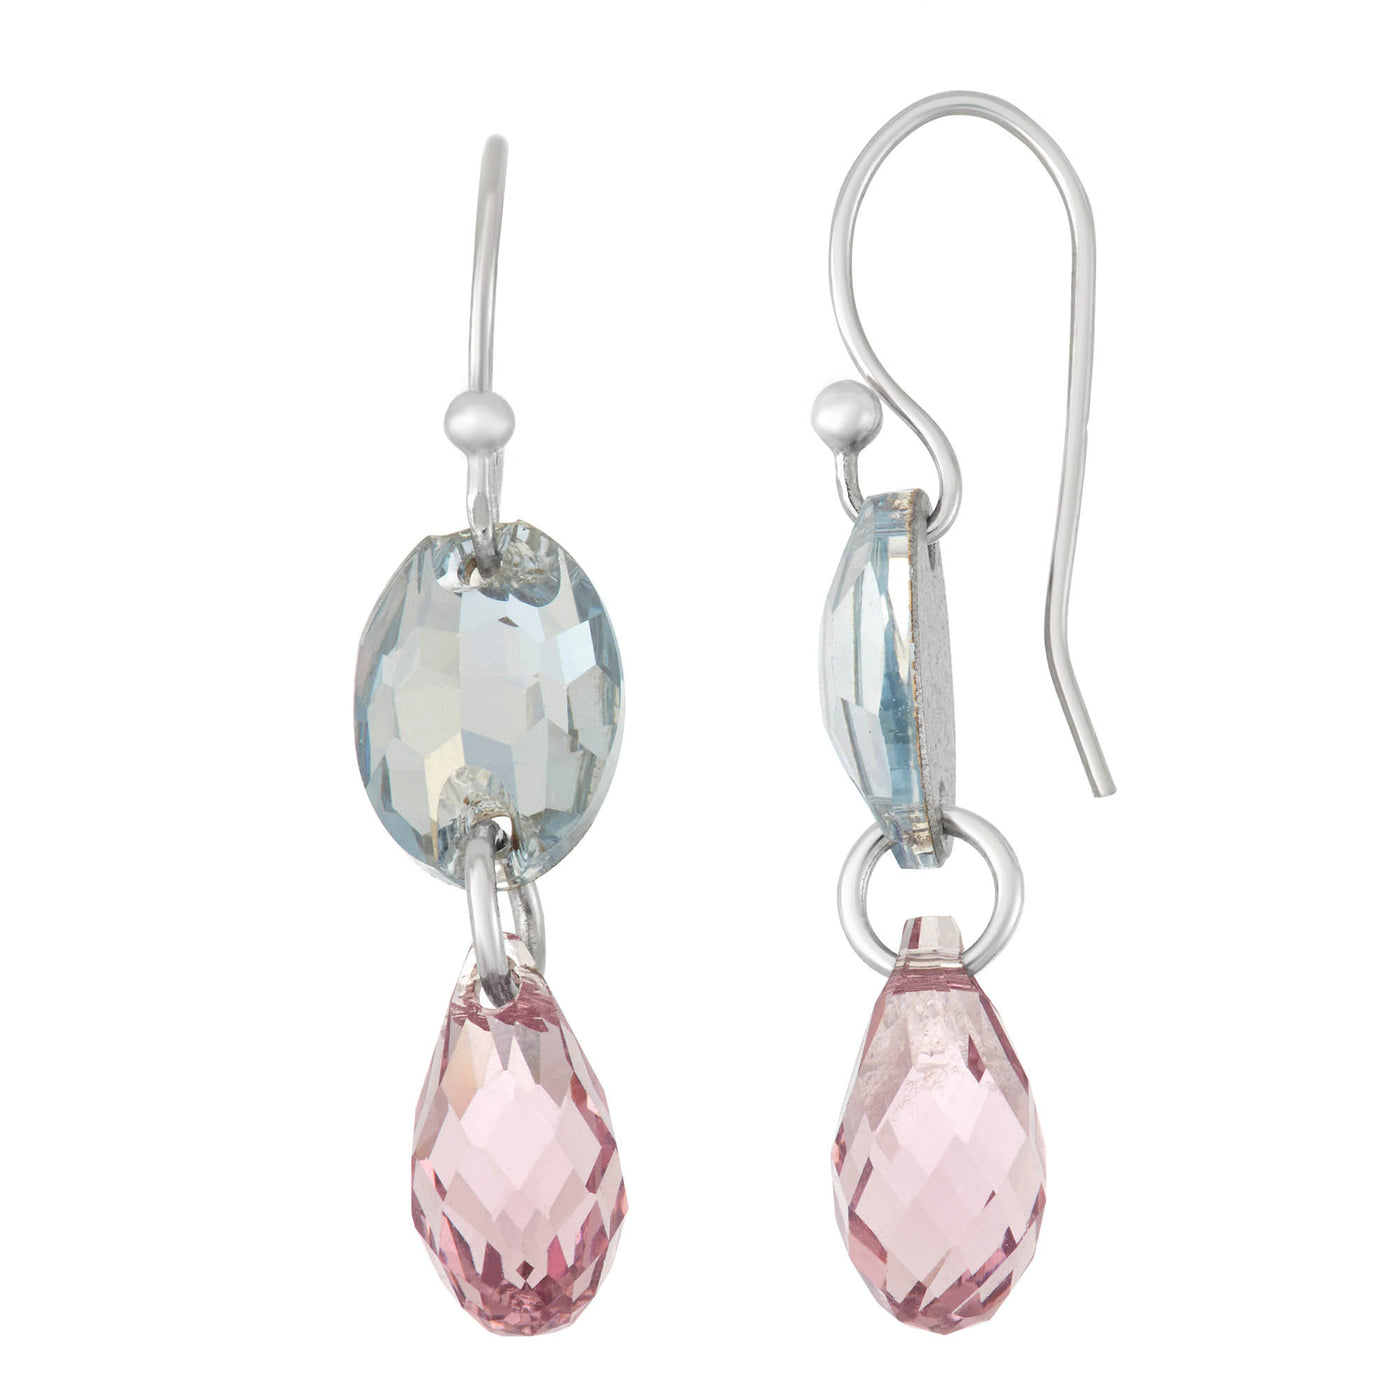 Rebecca Sloane Silver Oval Tear Drop Earring With Pink Crystals